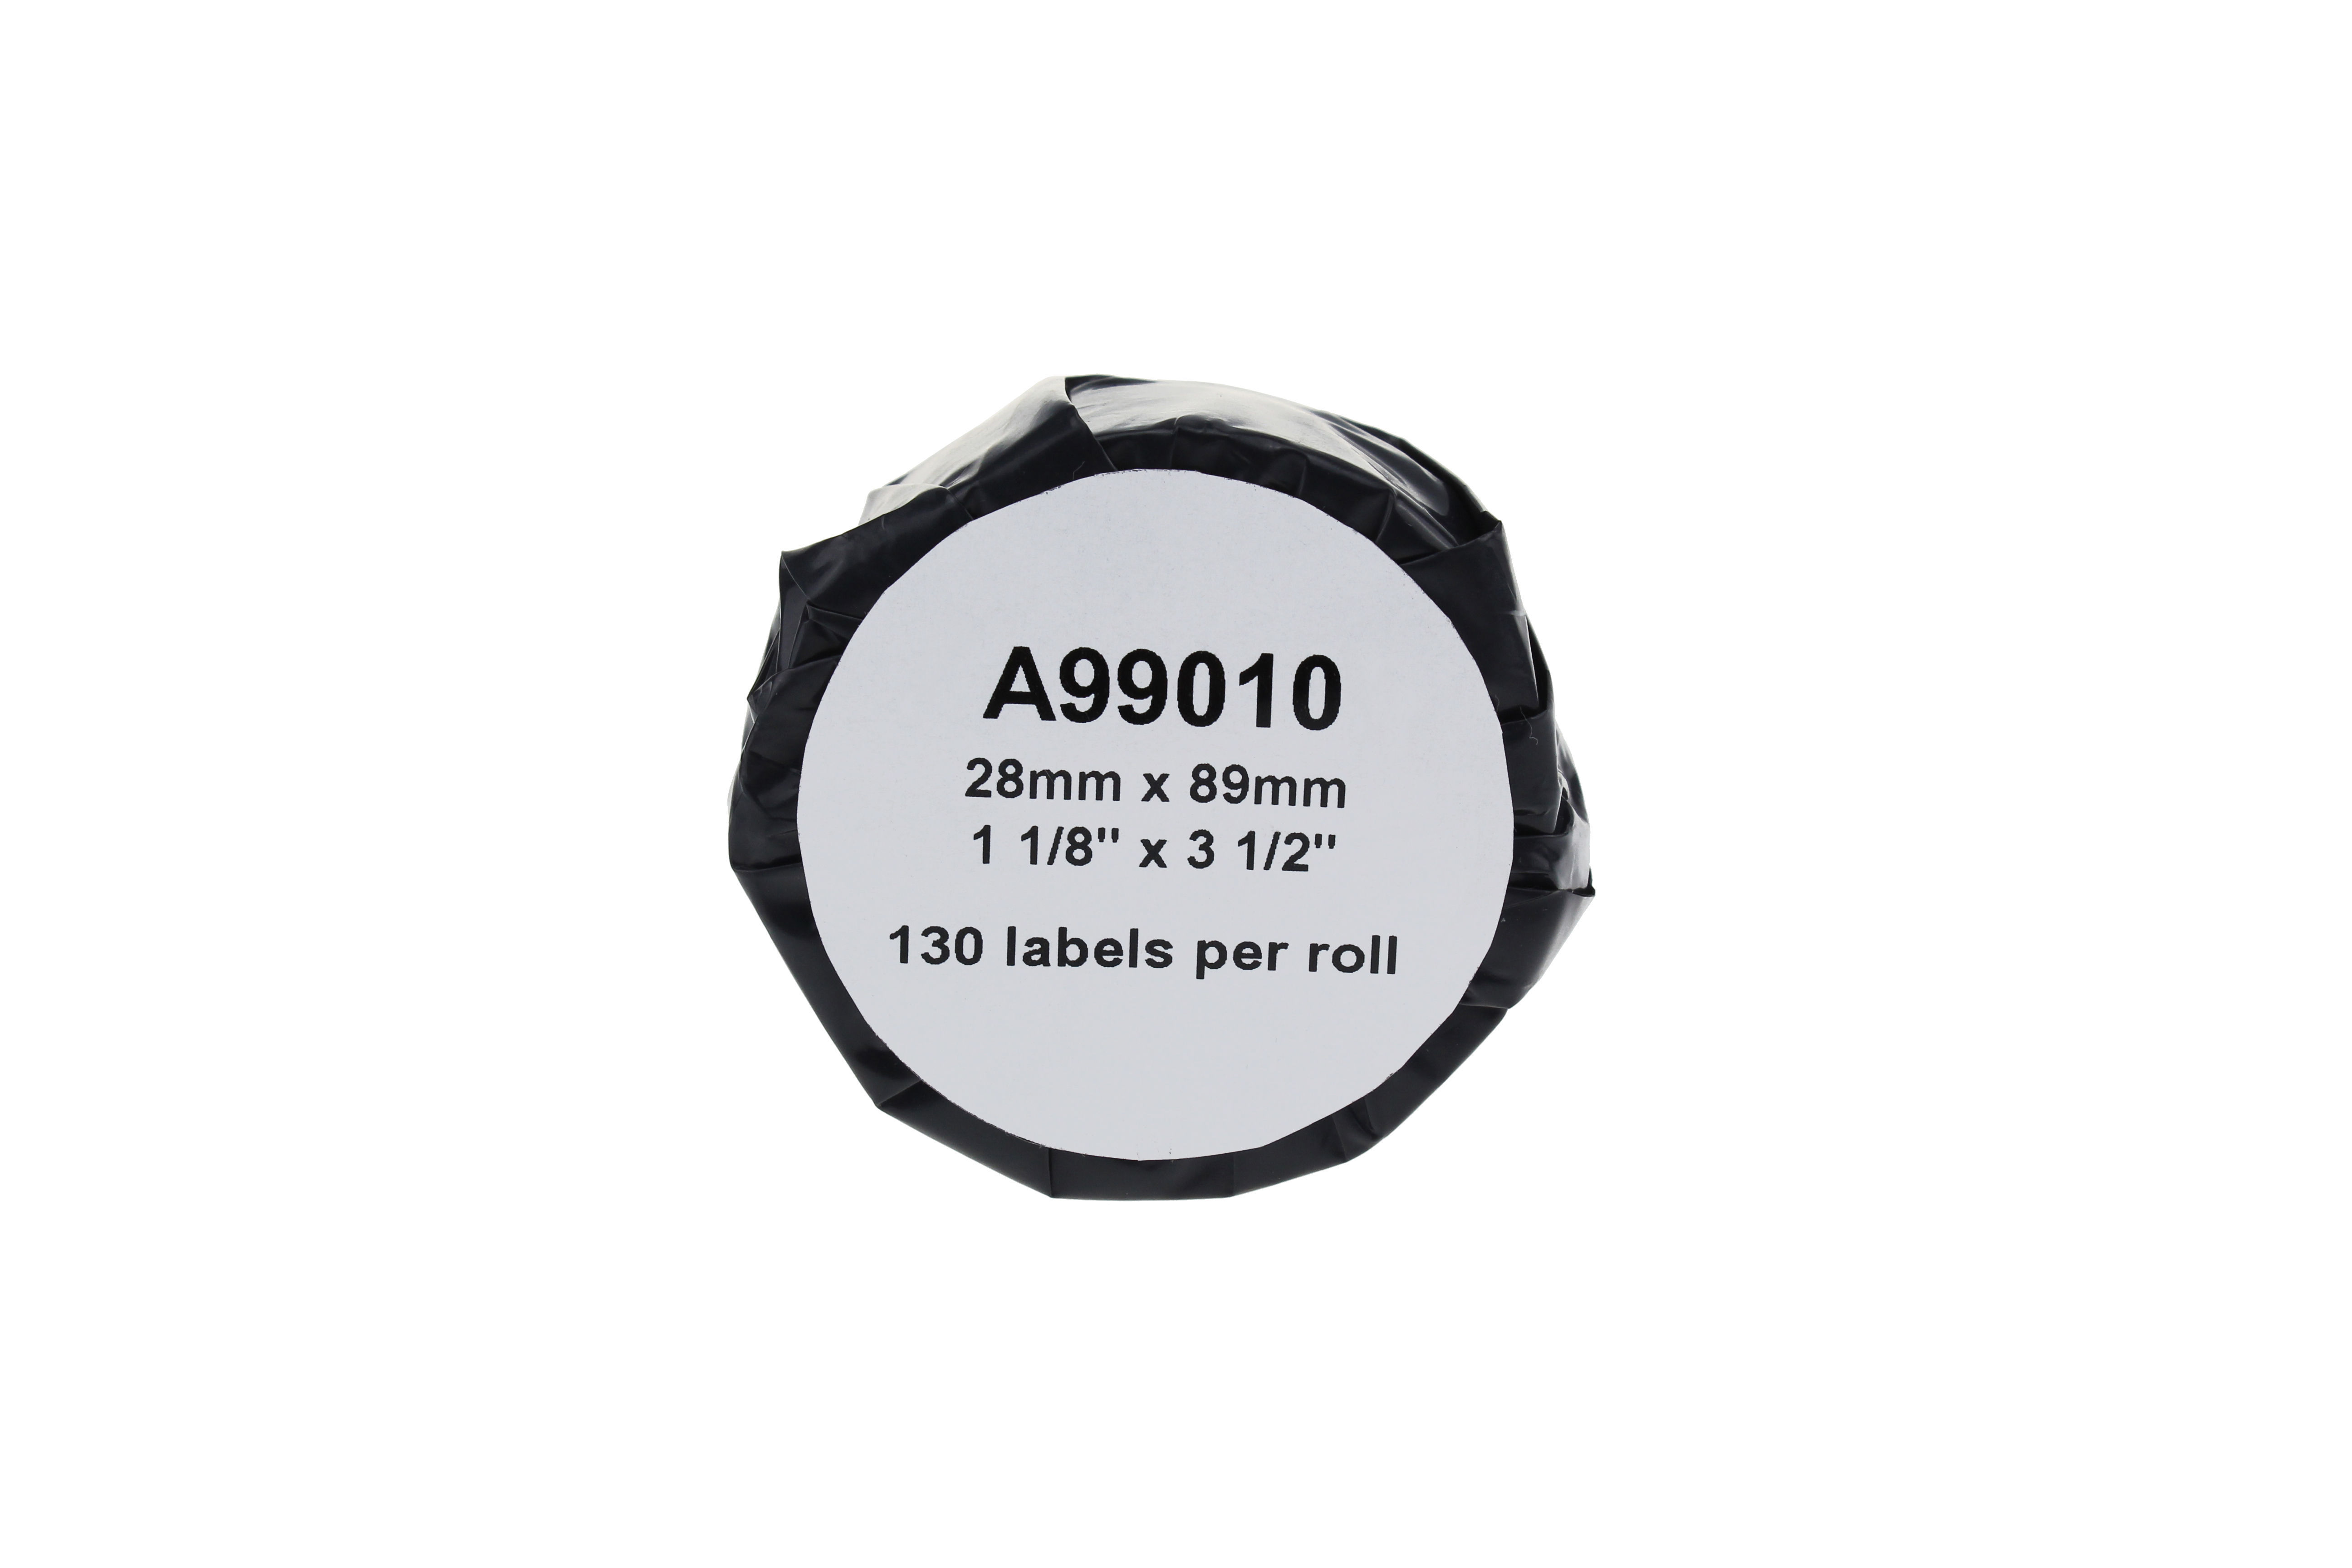 COMPATIBLE Dymo 99010 130 labels Pack (28mm x 89mm)